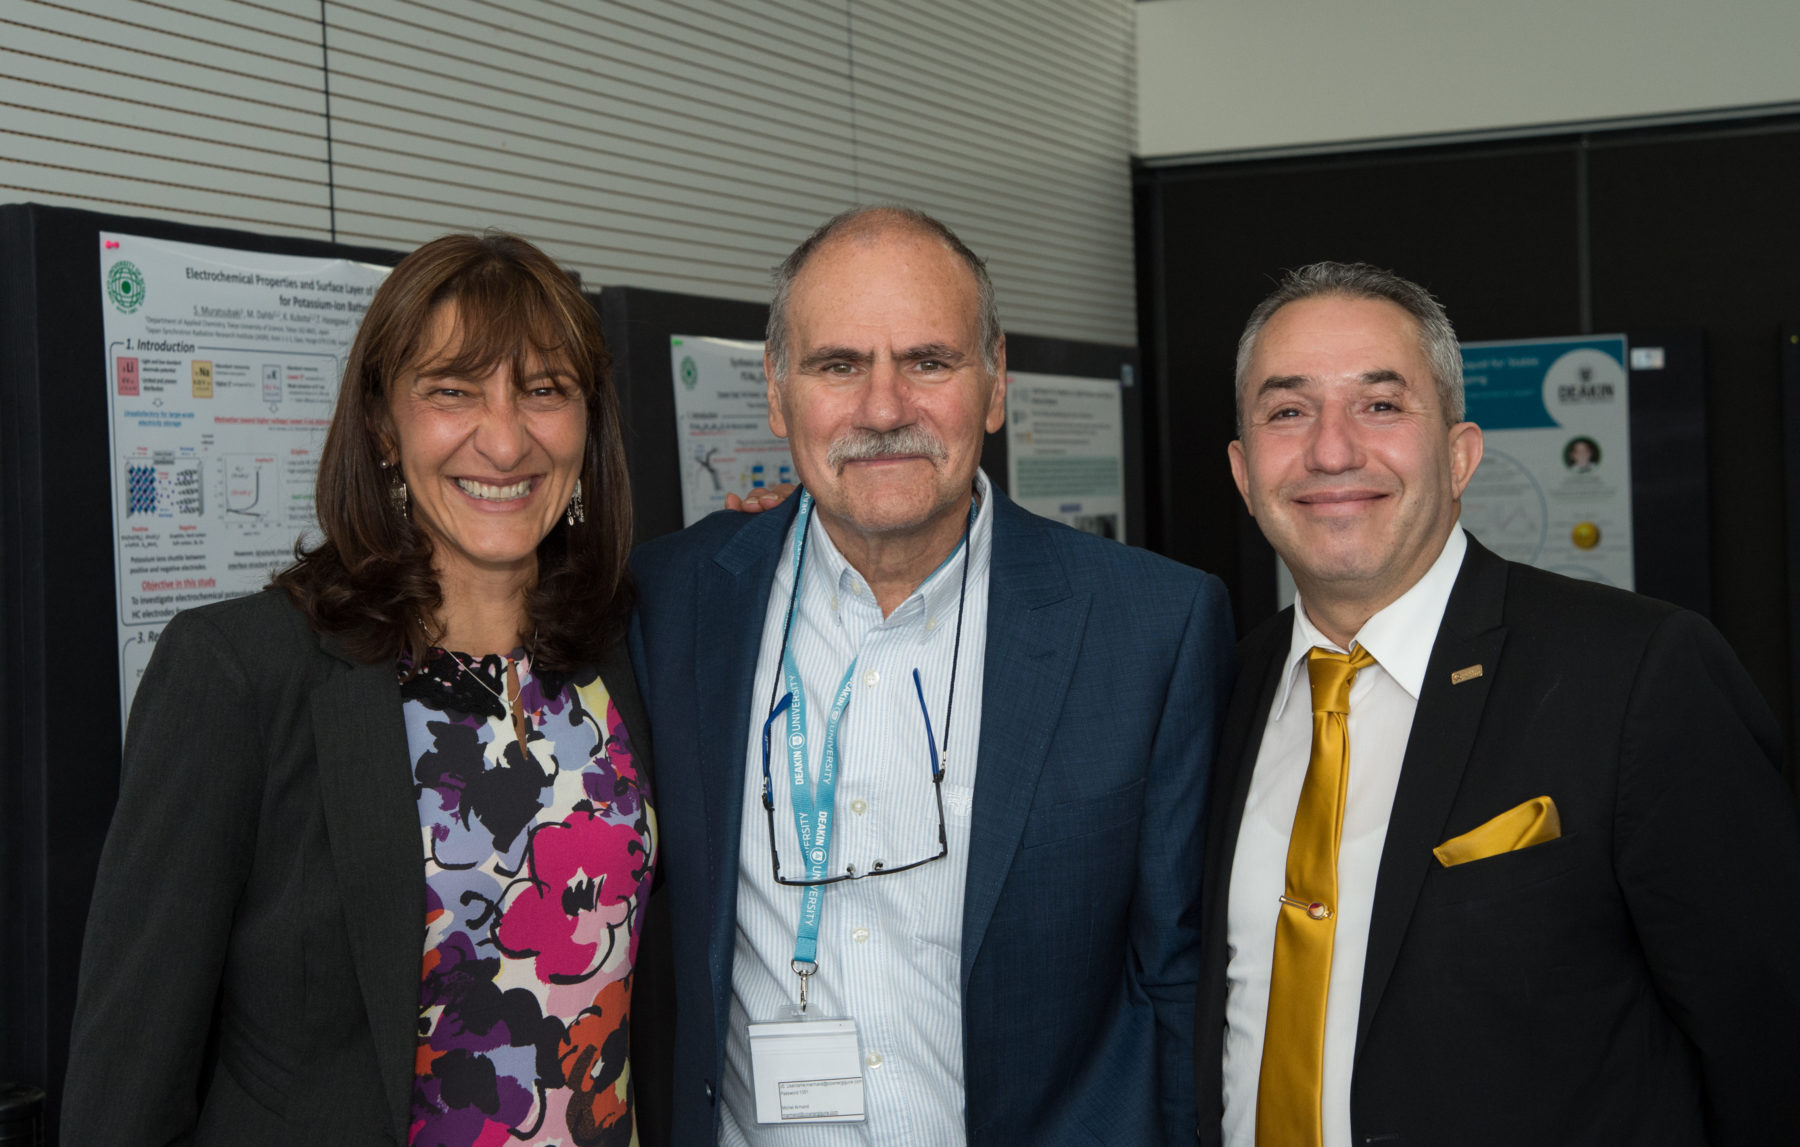 Prof Maria Forsyth, Prof Michel Armand and Dr Karim Zagib from IFM industry partner, HydroQuebec at the 3rd Sodium Battery Conference in Geelong.